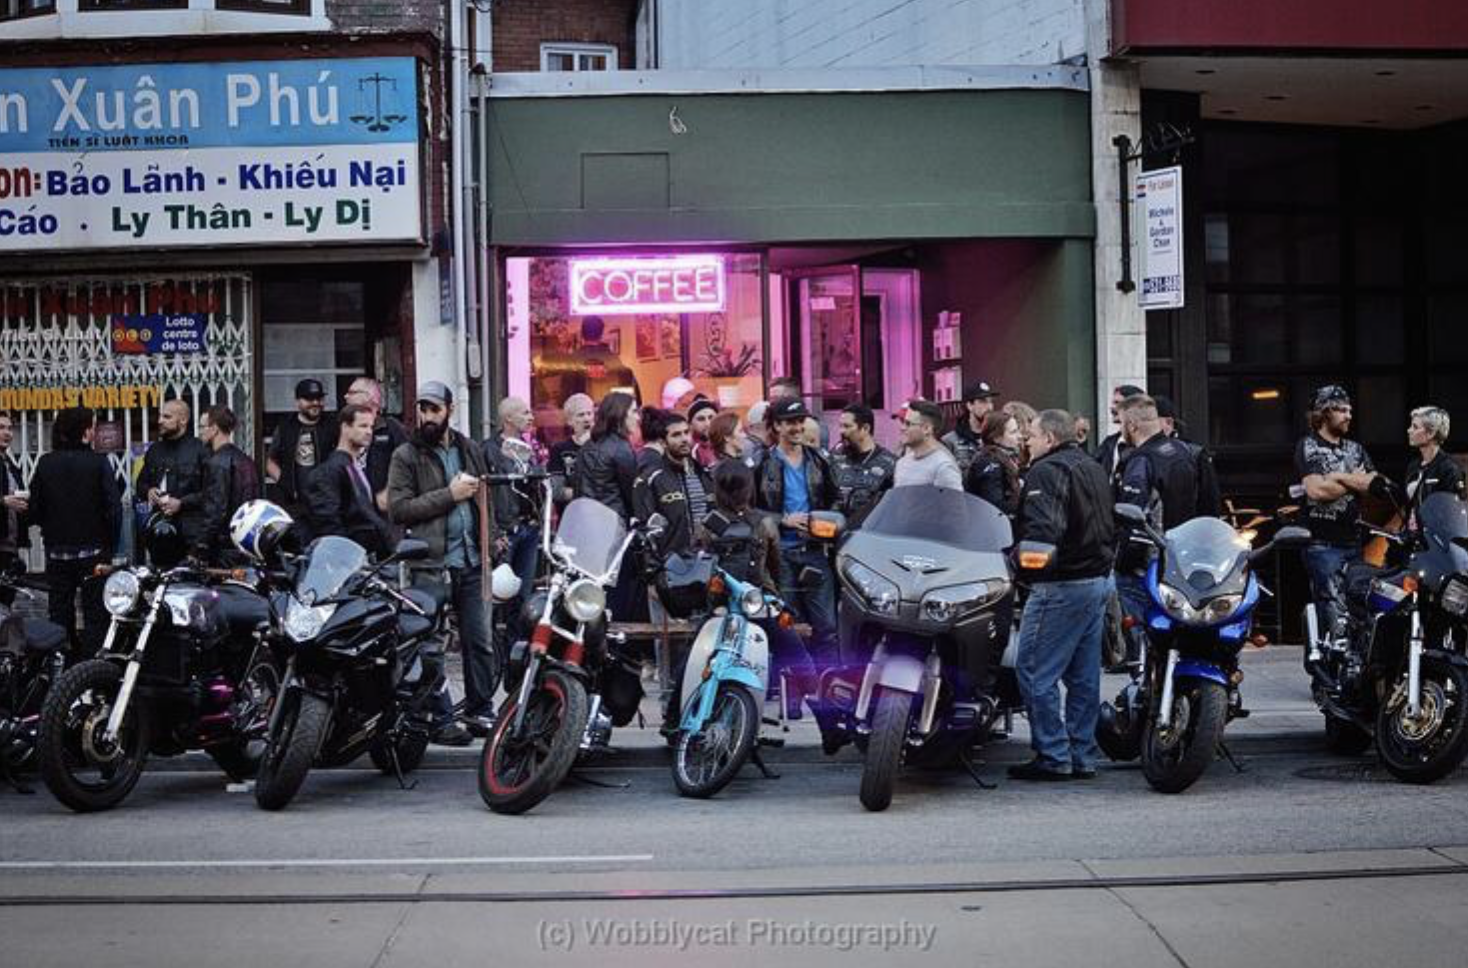 a long row of motorcycles parked side by side in front of a restaurant, with a large crowd of bikers chatting on the sidewalk.